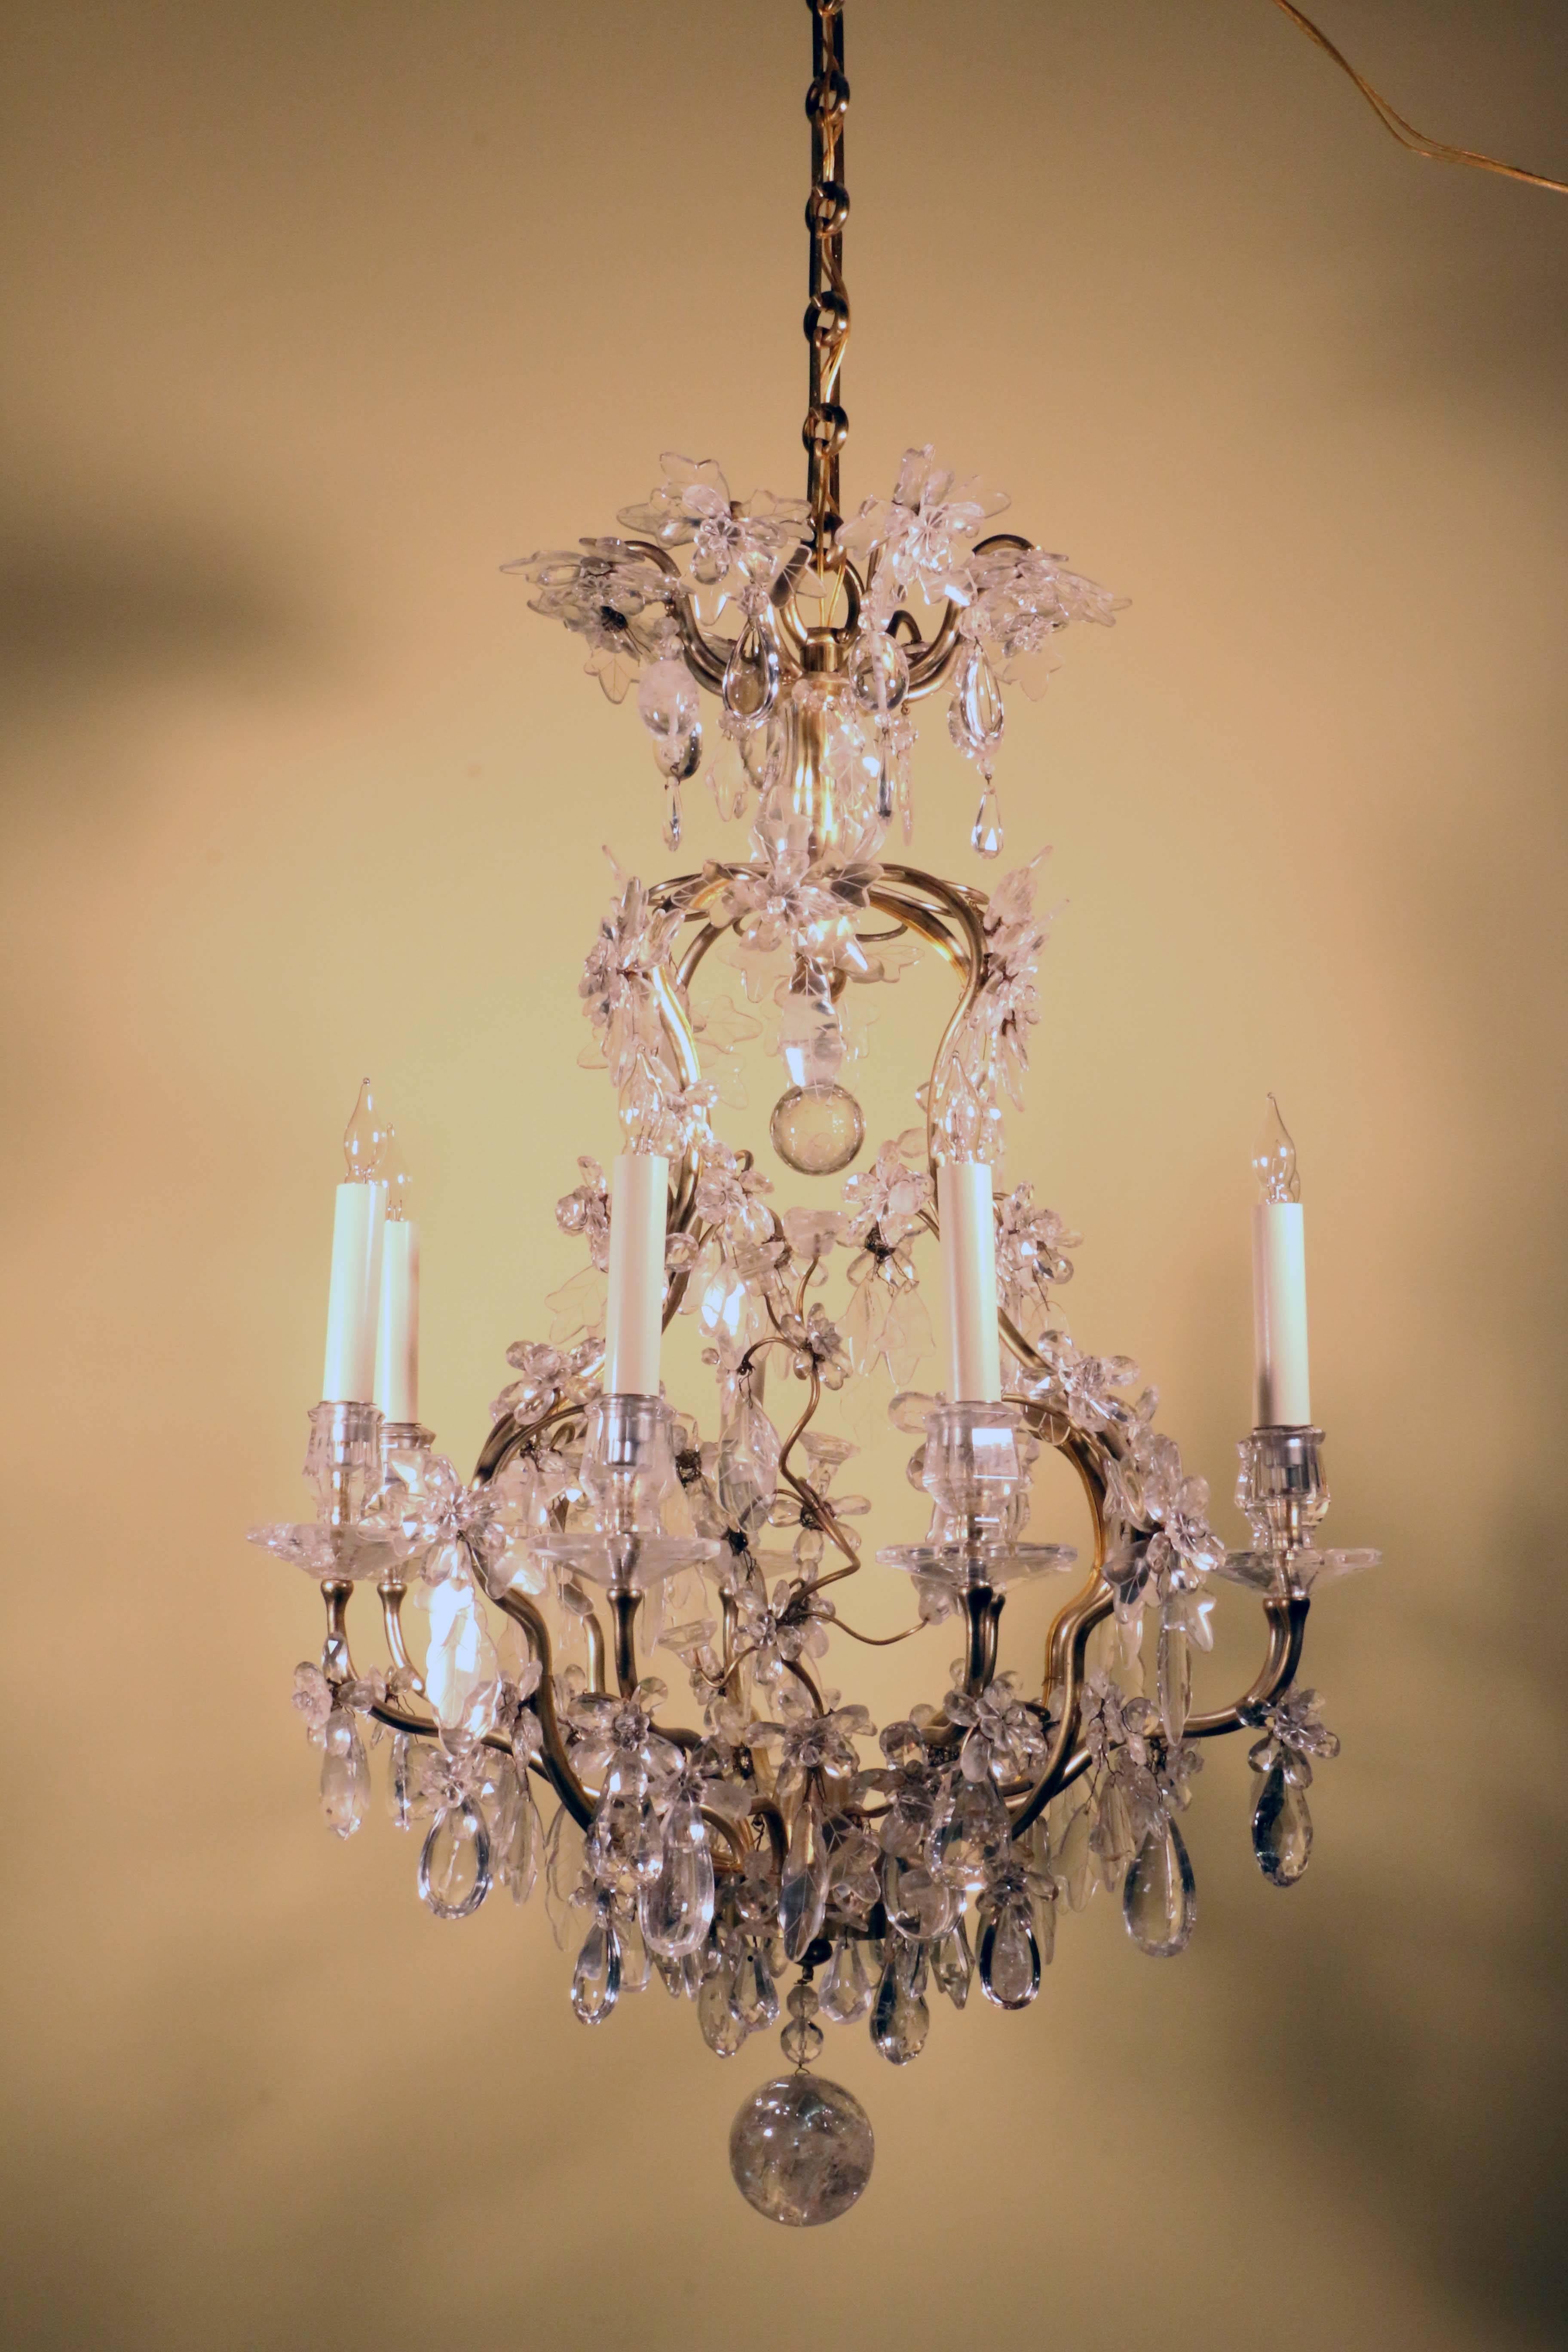 A very fine Maison Baguès style Louis XV style eight-light rock crystal and gilt bronze cage chandelier, naturalistically modeled with flowers and leaves., the central stem enwrapped by a spiraling branch , the whole hung with rock crystal drops,